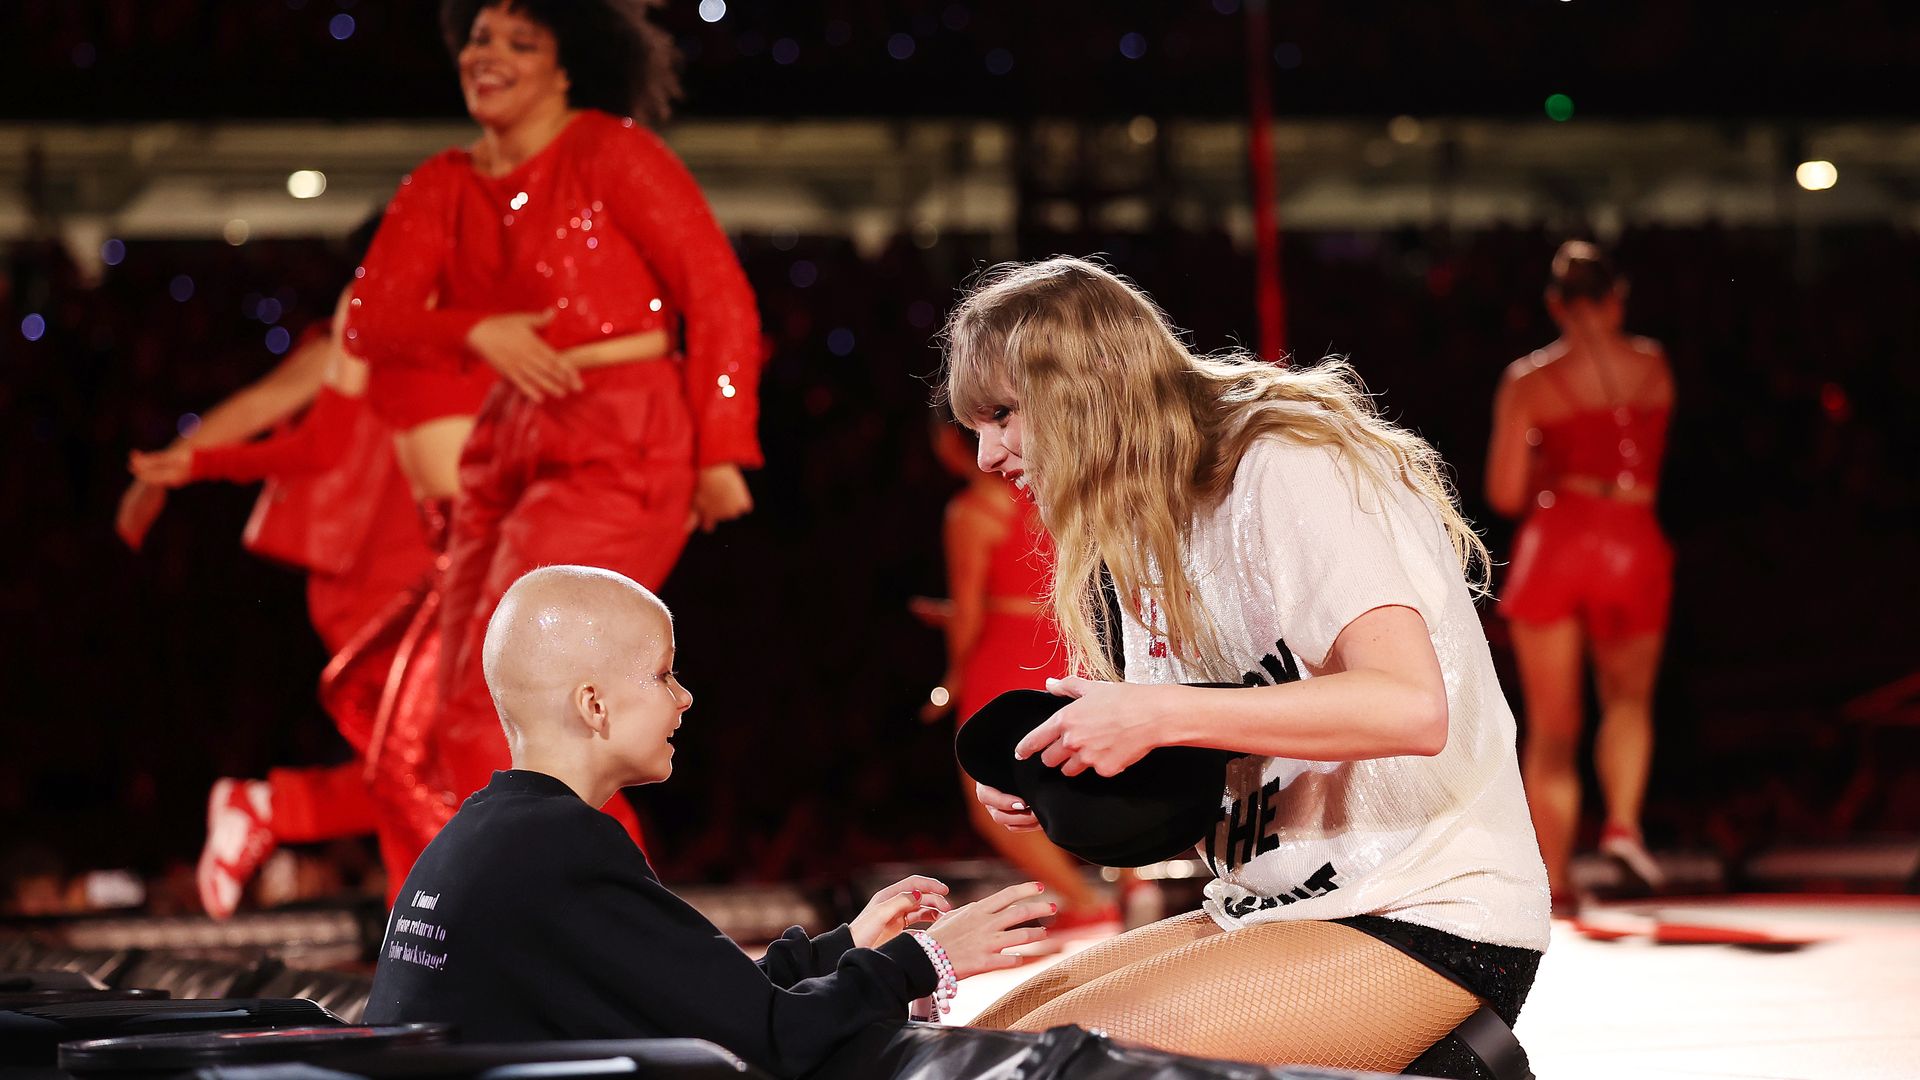 Tragic end for young Taylor Swift fan days before her 10th birthday